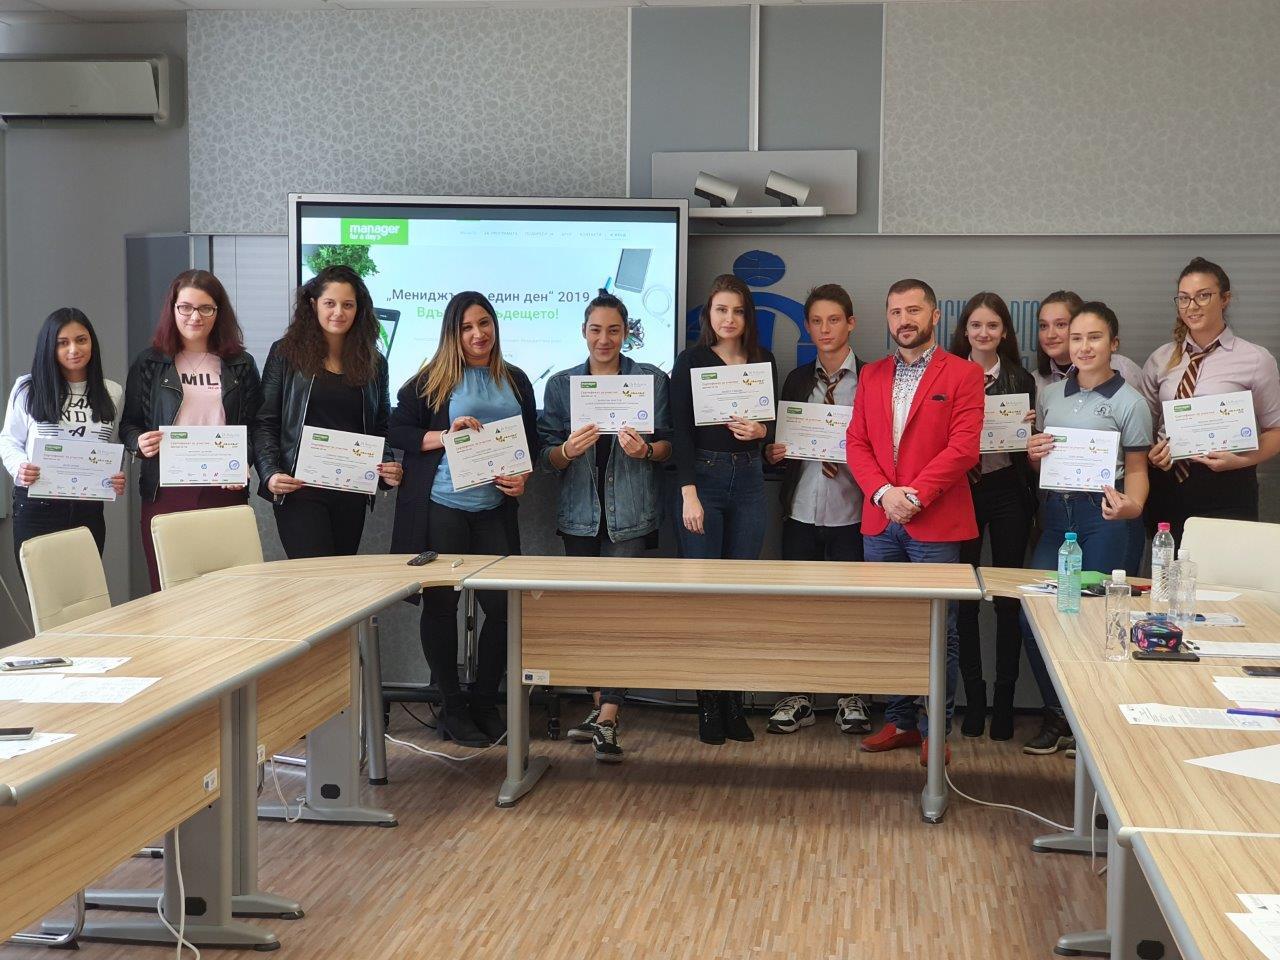 Ruse students were Managers for a day in the Ruse Chamber of Commercial Industrial Chamber